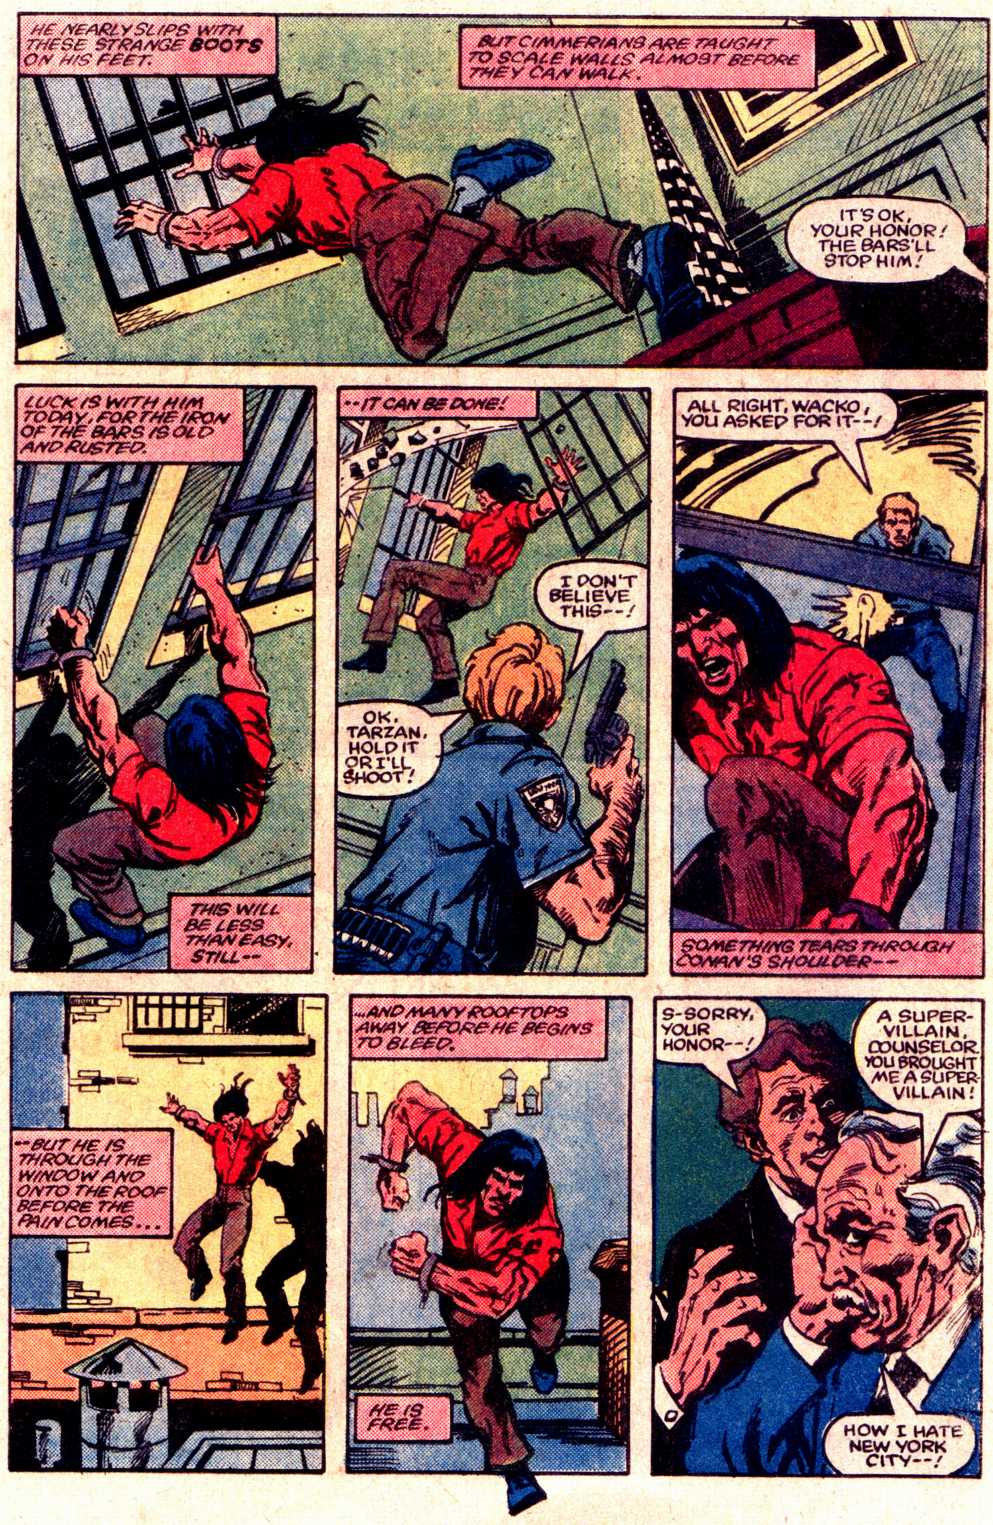 What If? (1977) issue 43 - Conan the Barbarian were stranded in the 20th century - Page 6